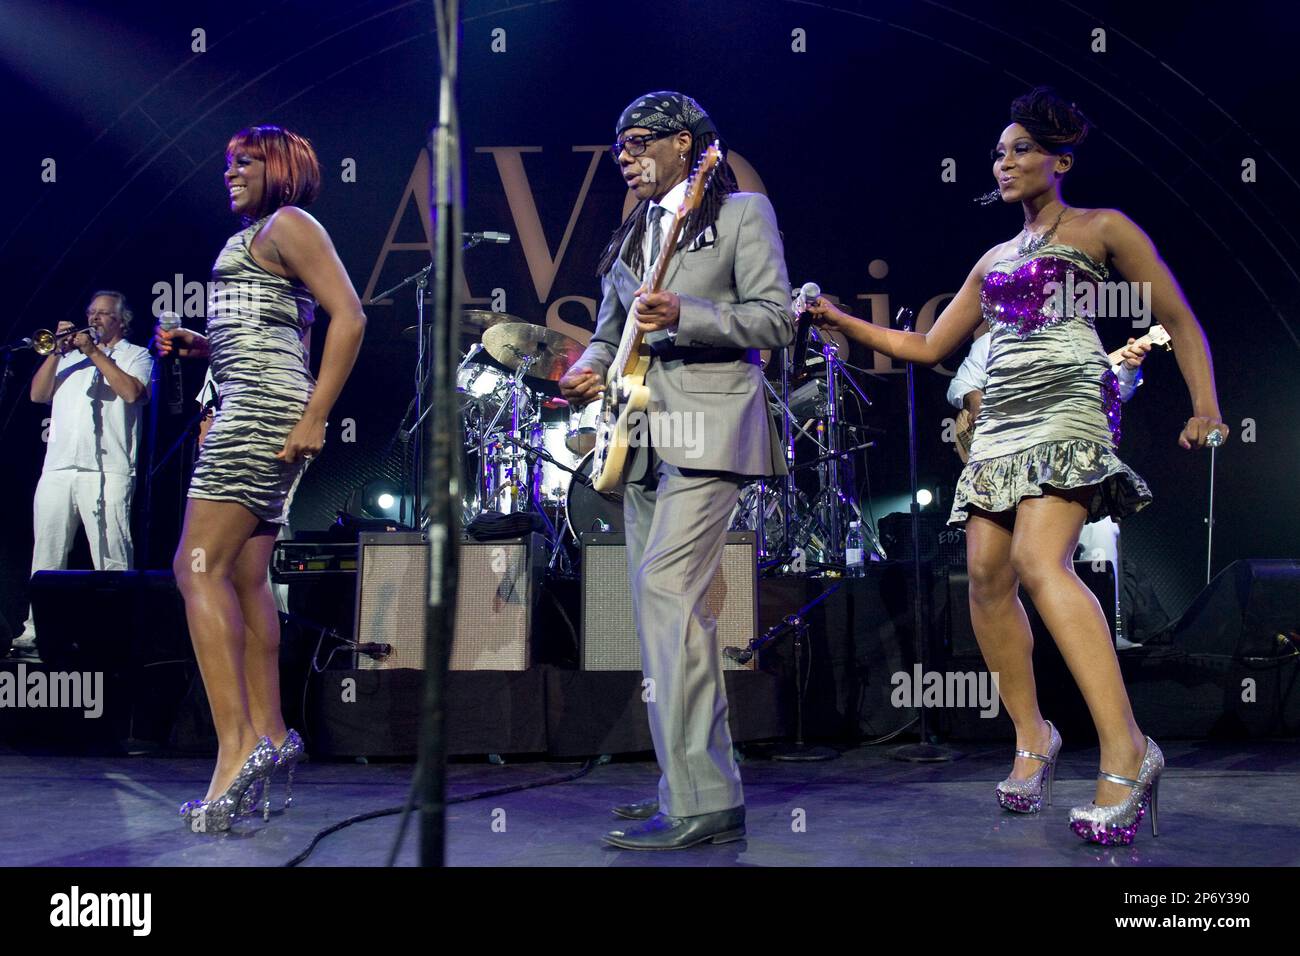 In this picture taken Nov. 9, 2011 American guitarist and producer Nile  Rodgers, center, performs with his band Chic on stage at the Avo Session in  Basel, Switzerland. (AP Photo/Keystone/ Georgios Kefalas